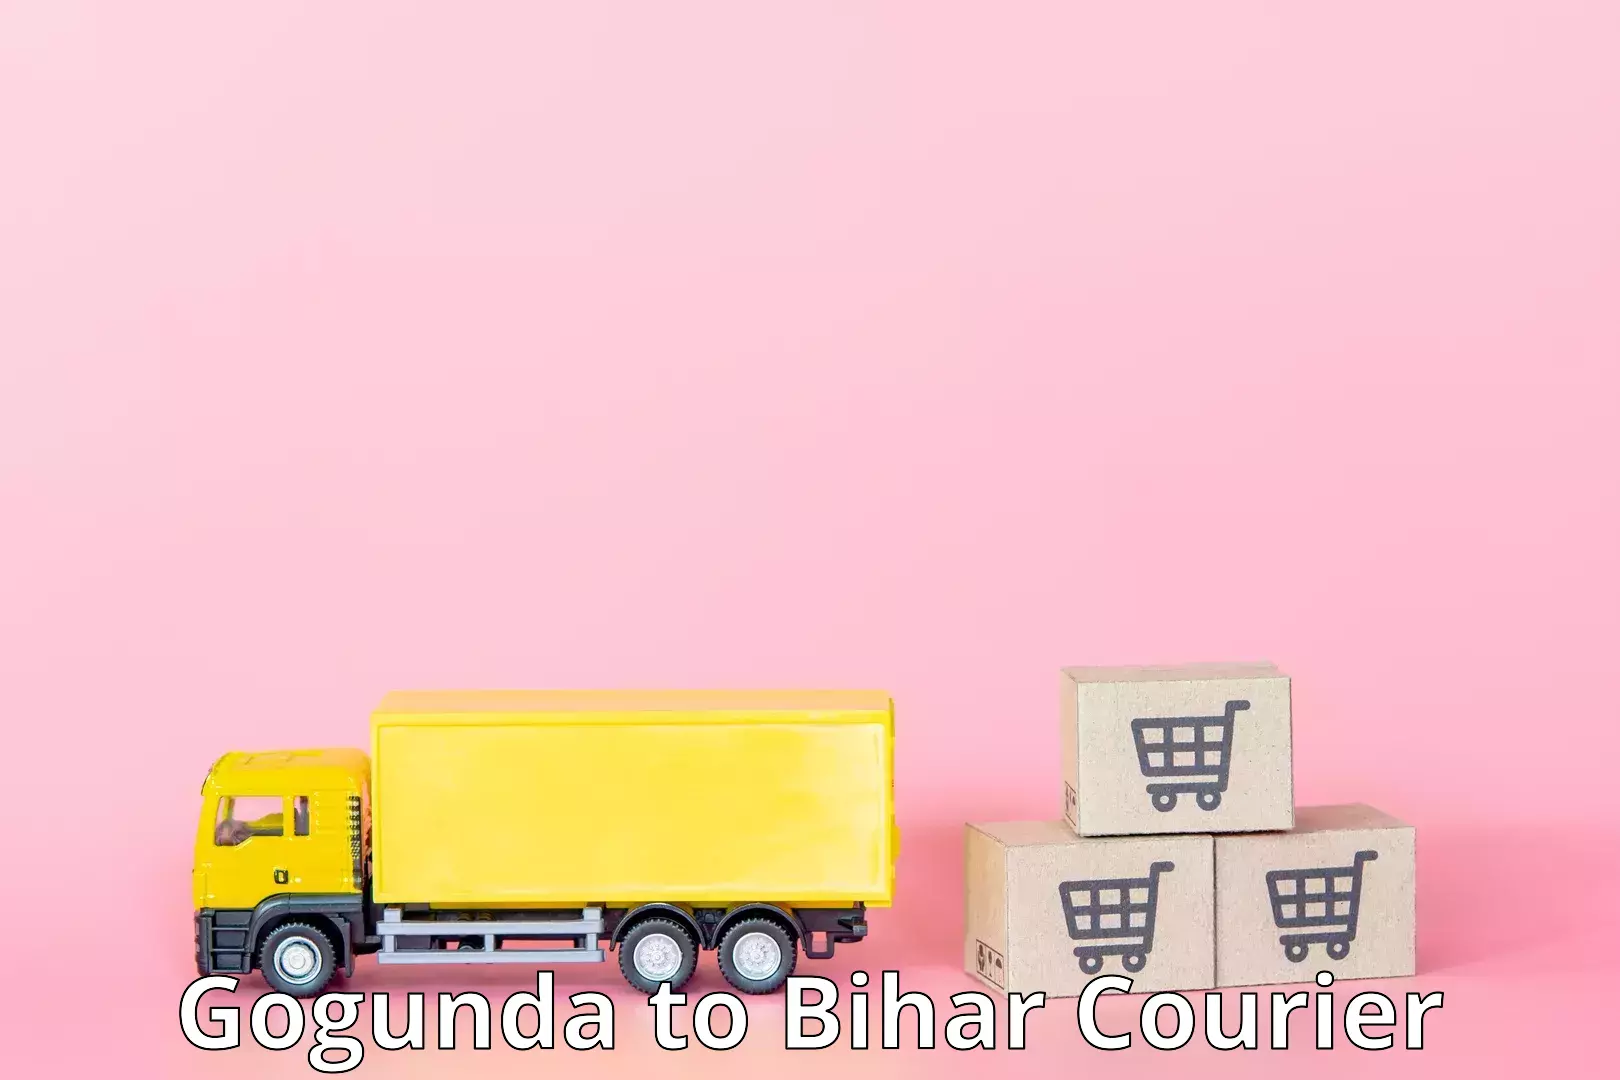 Efficient package consolidation Gogunda to Baniapur